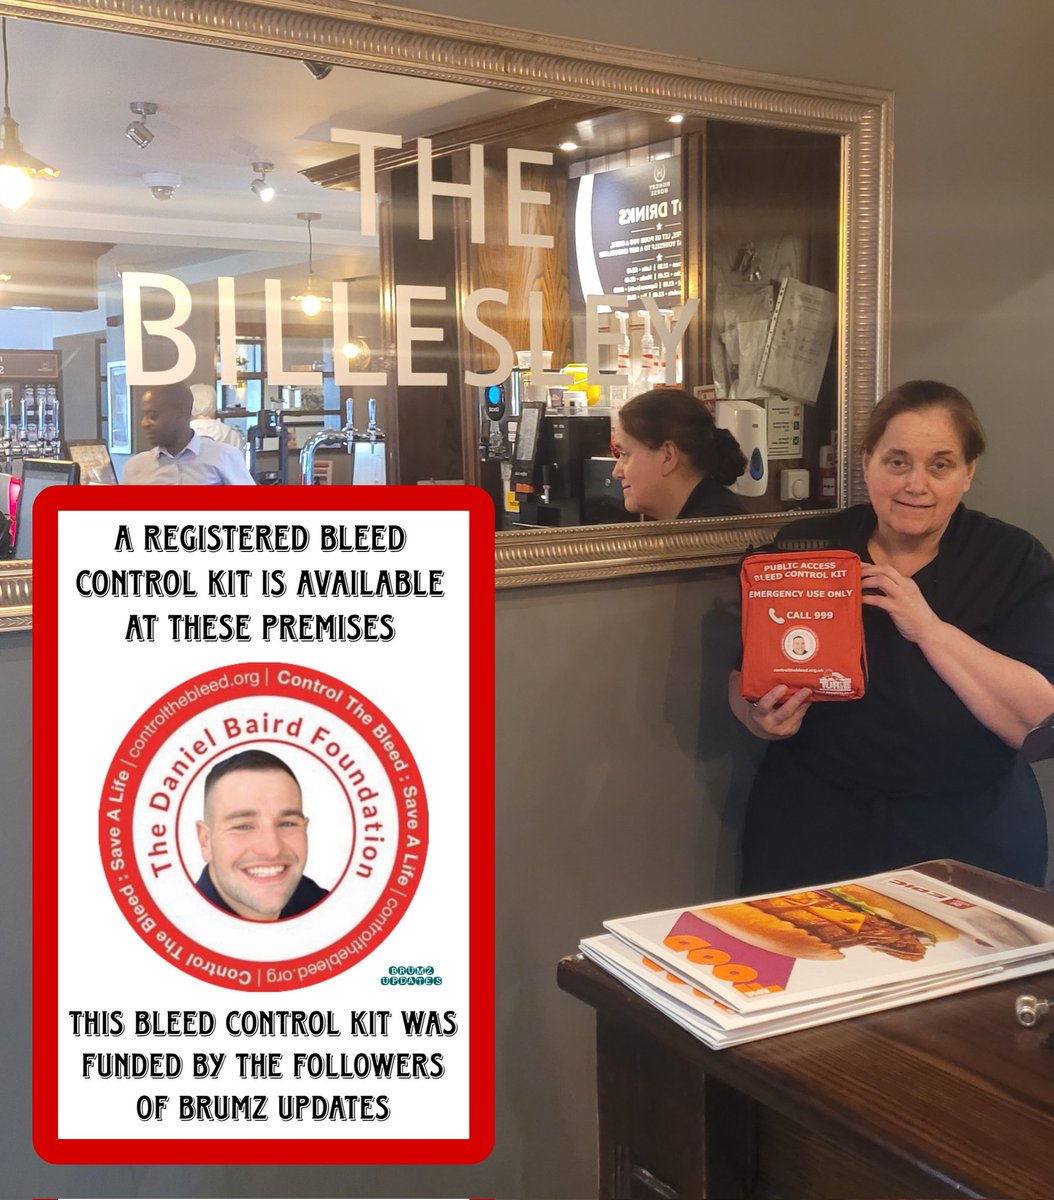 Another bleed control kit handed out ❤️

This kit will be registered and available at The Billesley, Birmingham

#ControlTheBleed